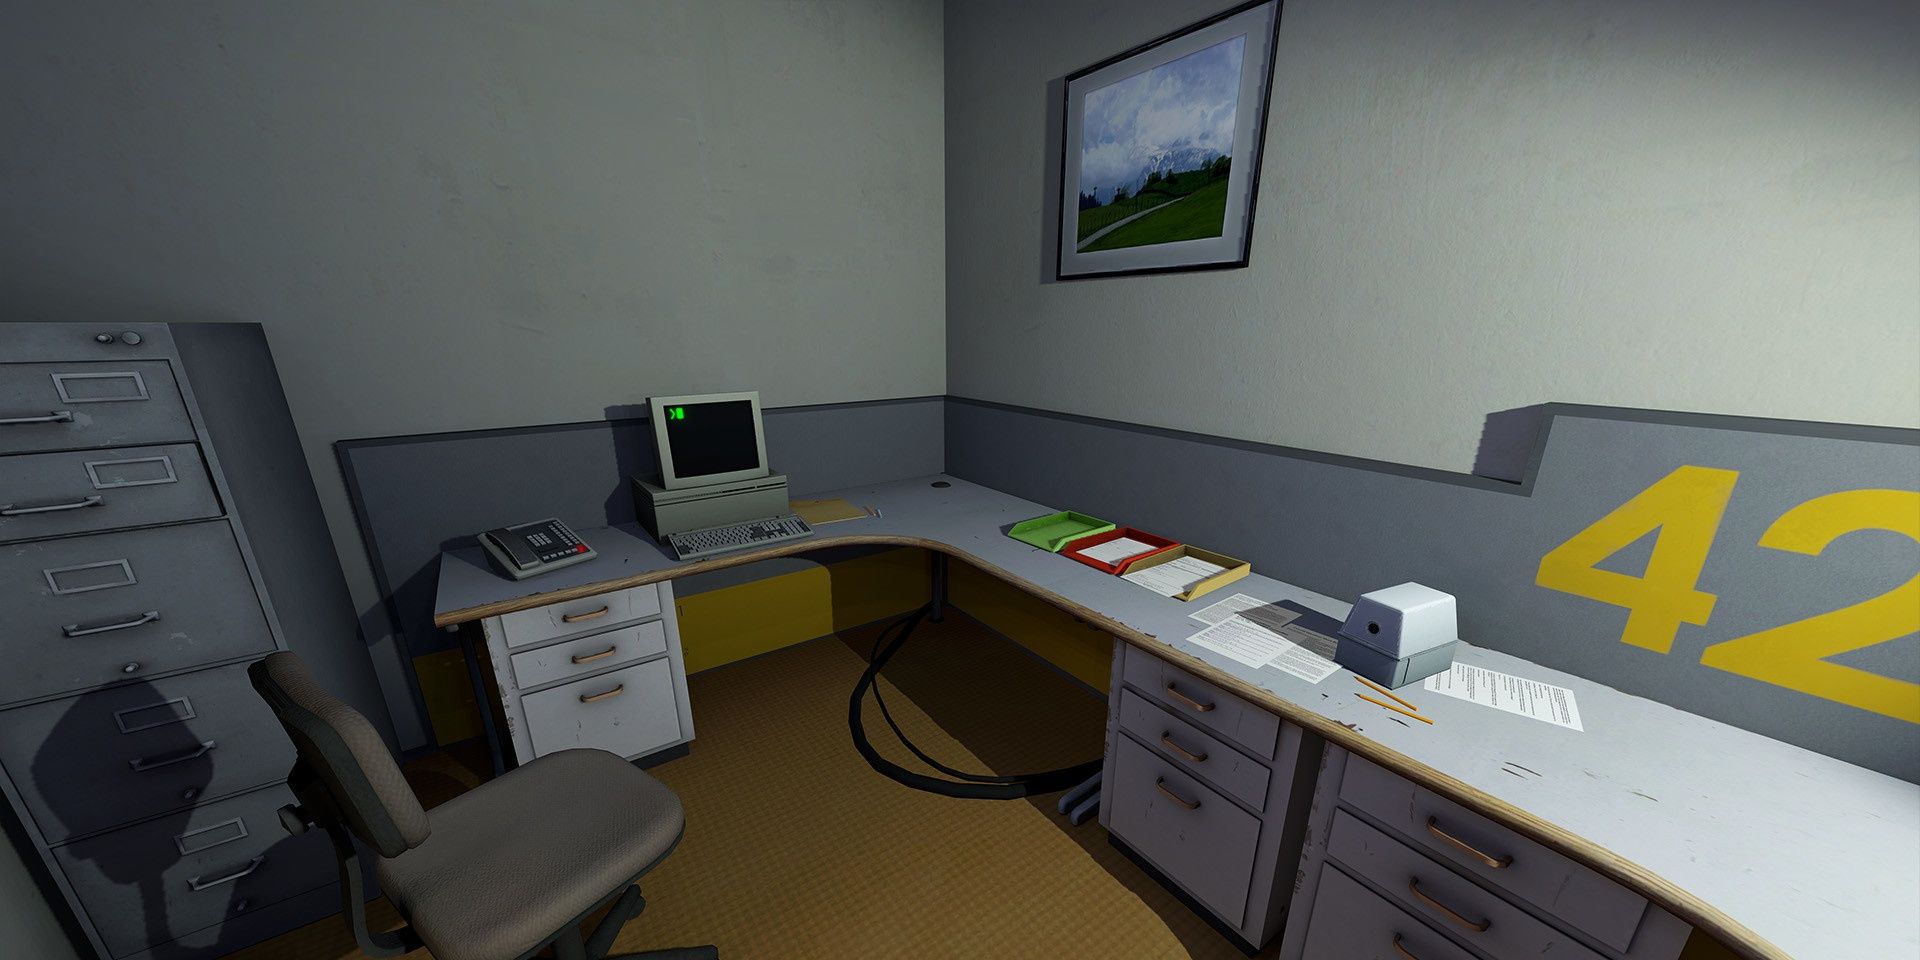 Stanley's office in The Stanley Parable: Ultra Deluxe